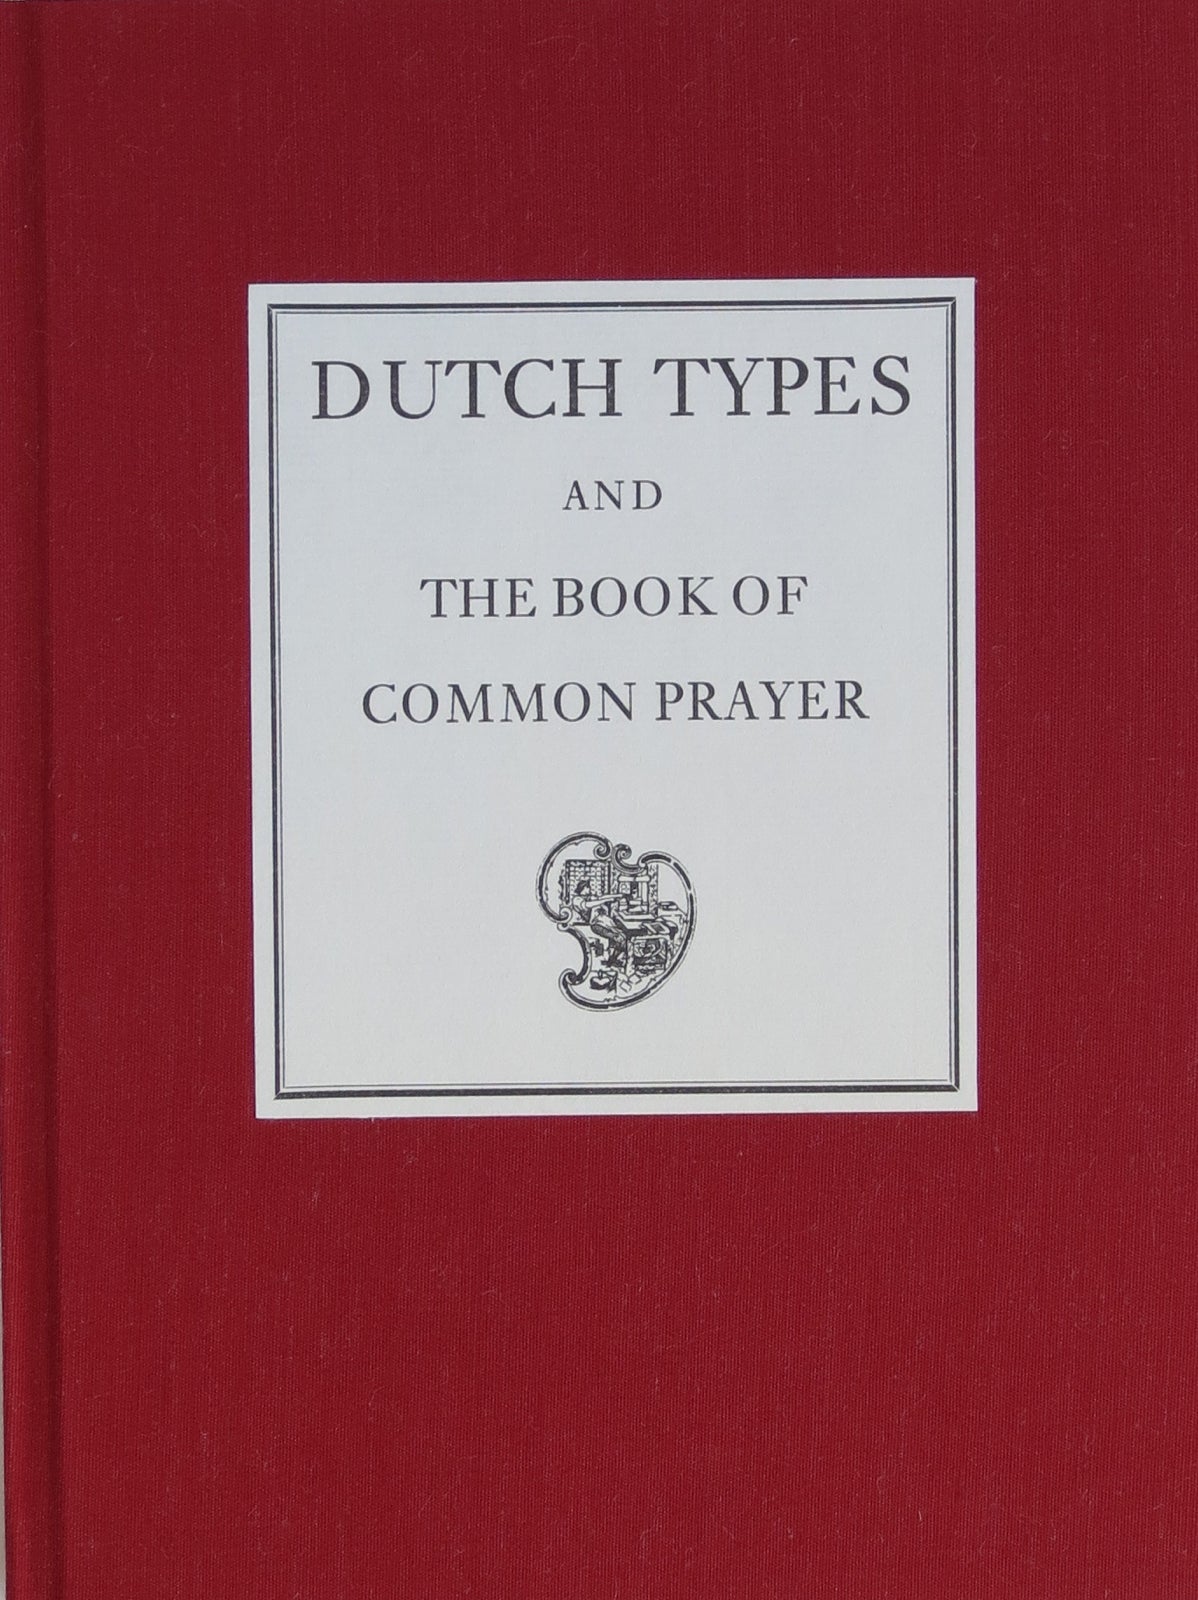 Dutch Types Used in the English Book of Common Prayer 1911-1930. Steven G. Heaver.